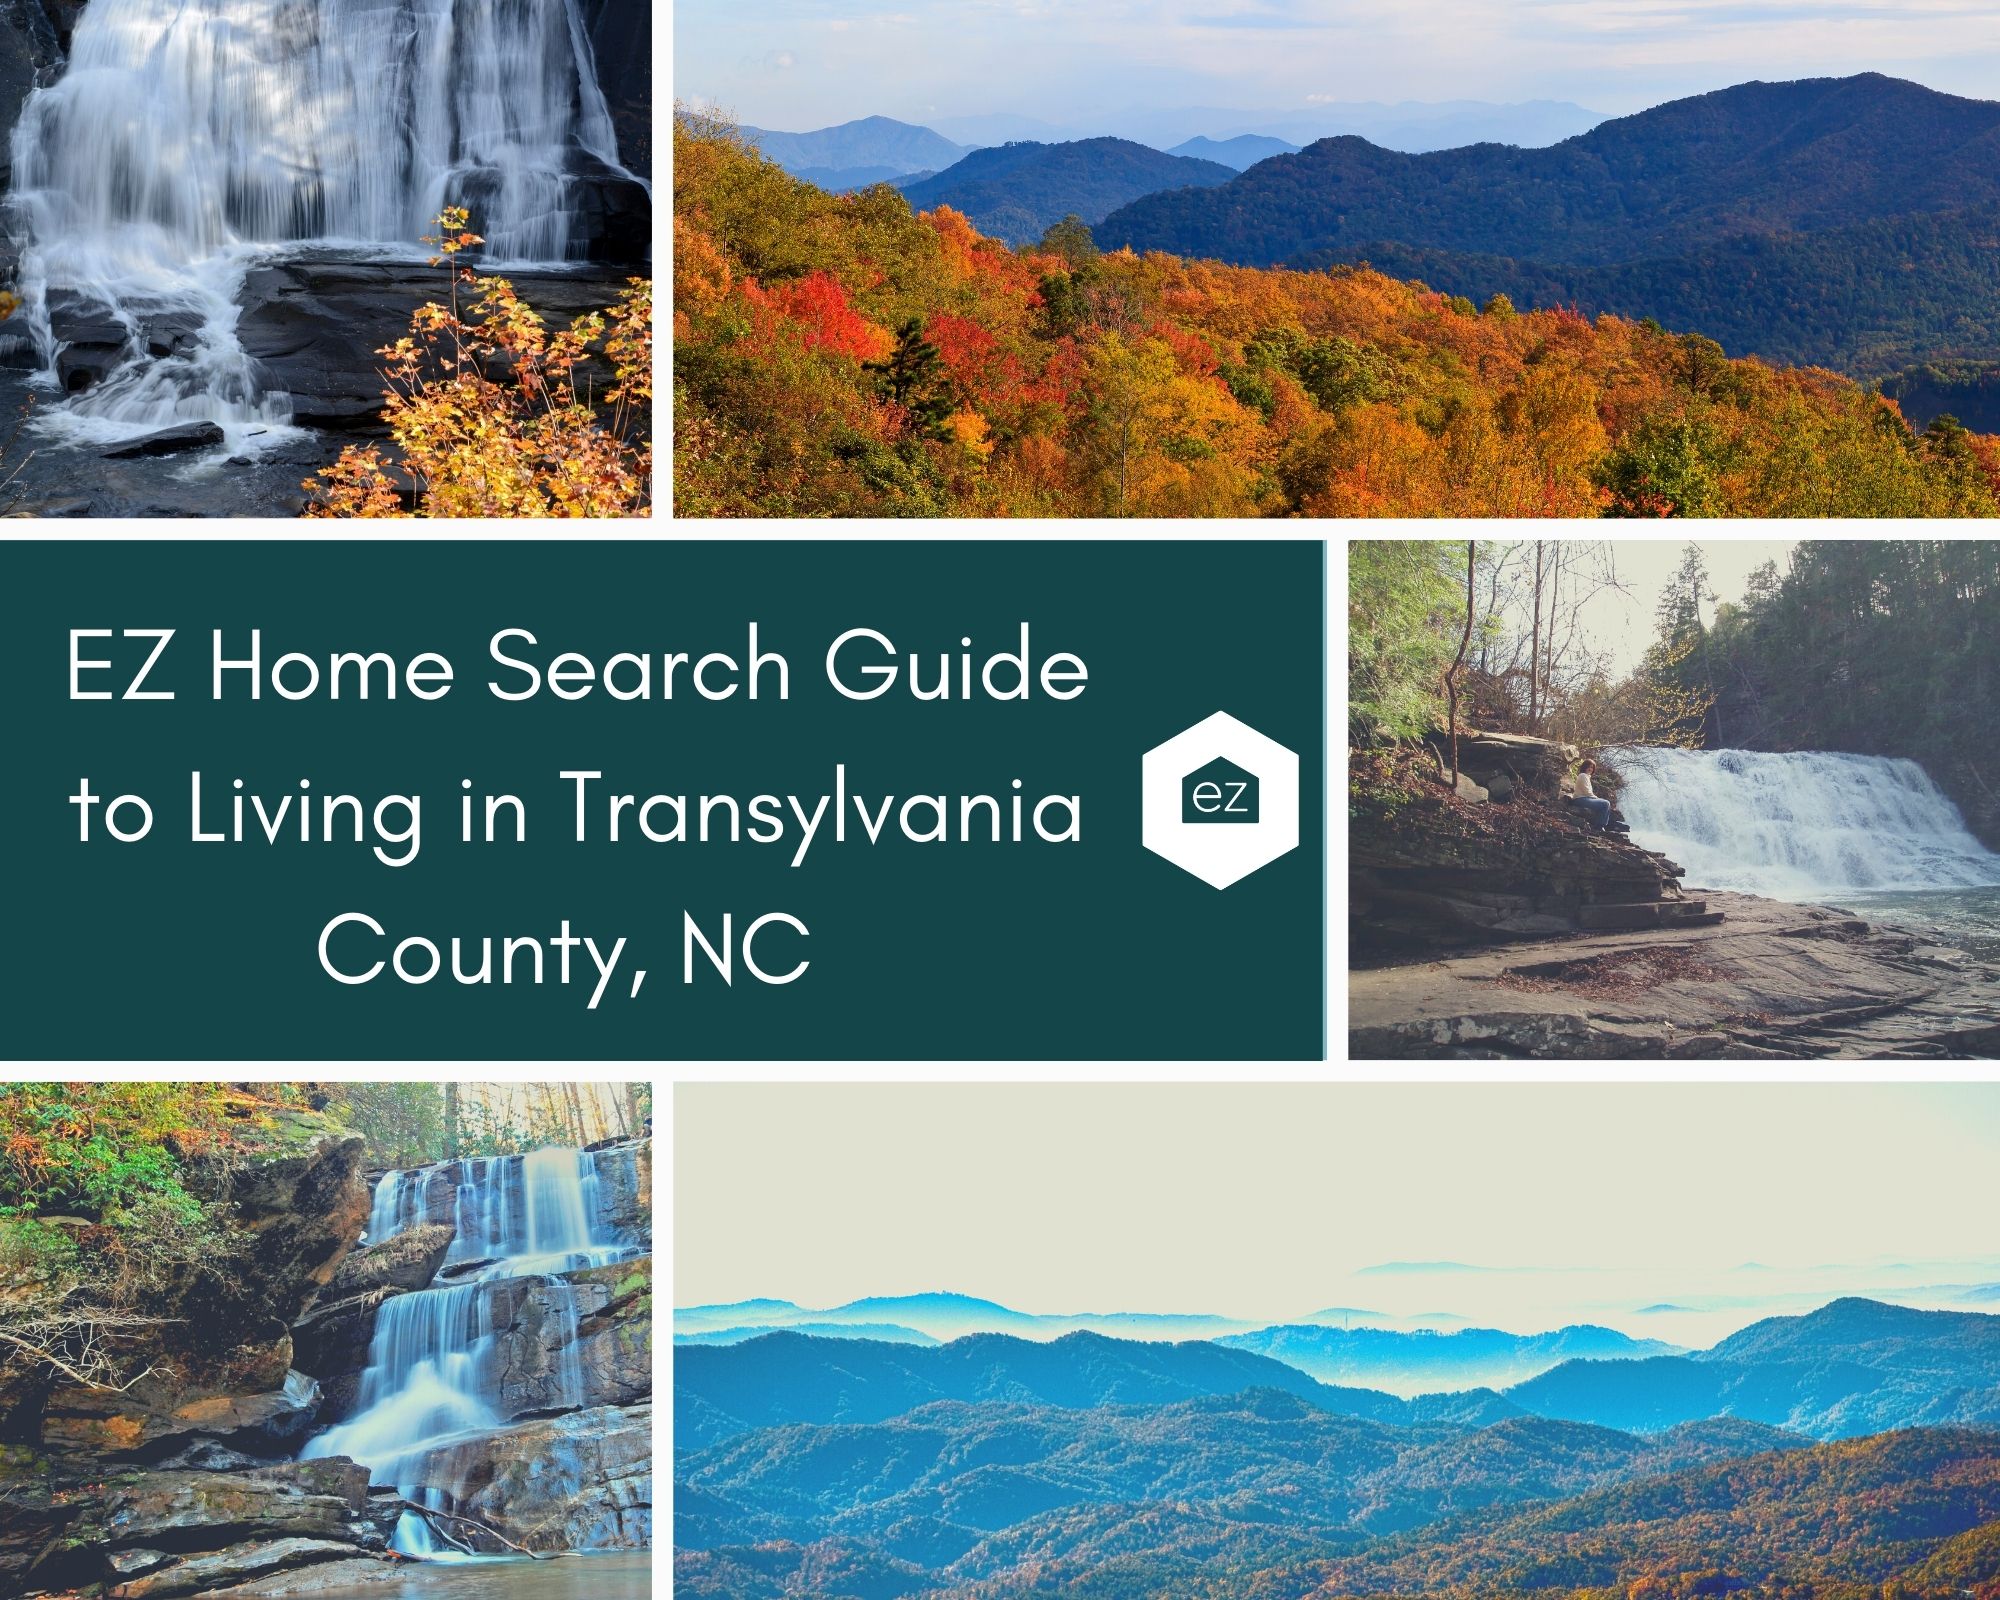 Photos taken from Transylvania County, NC with waterfalls and mountains